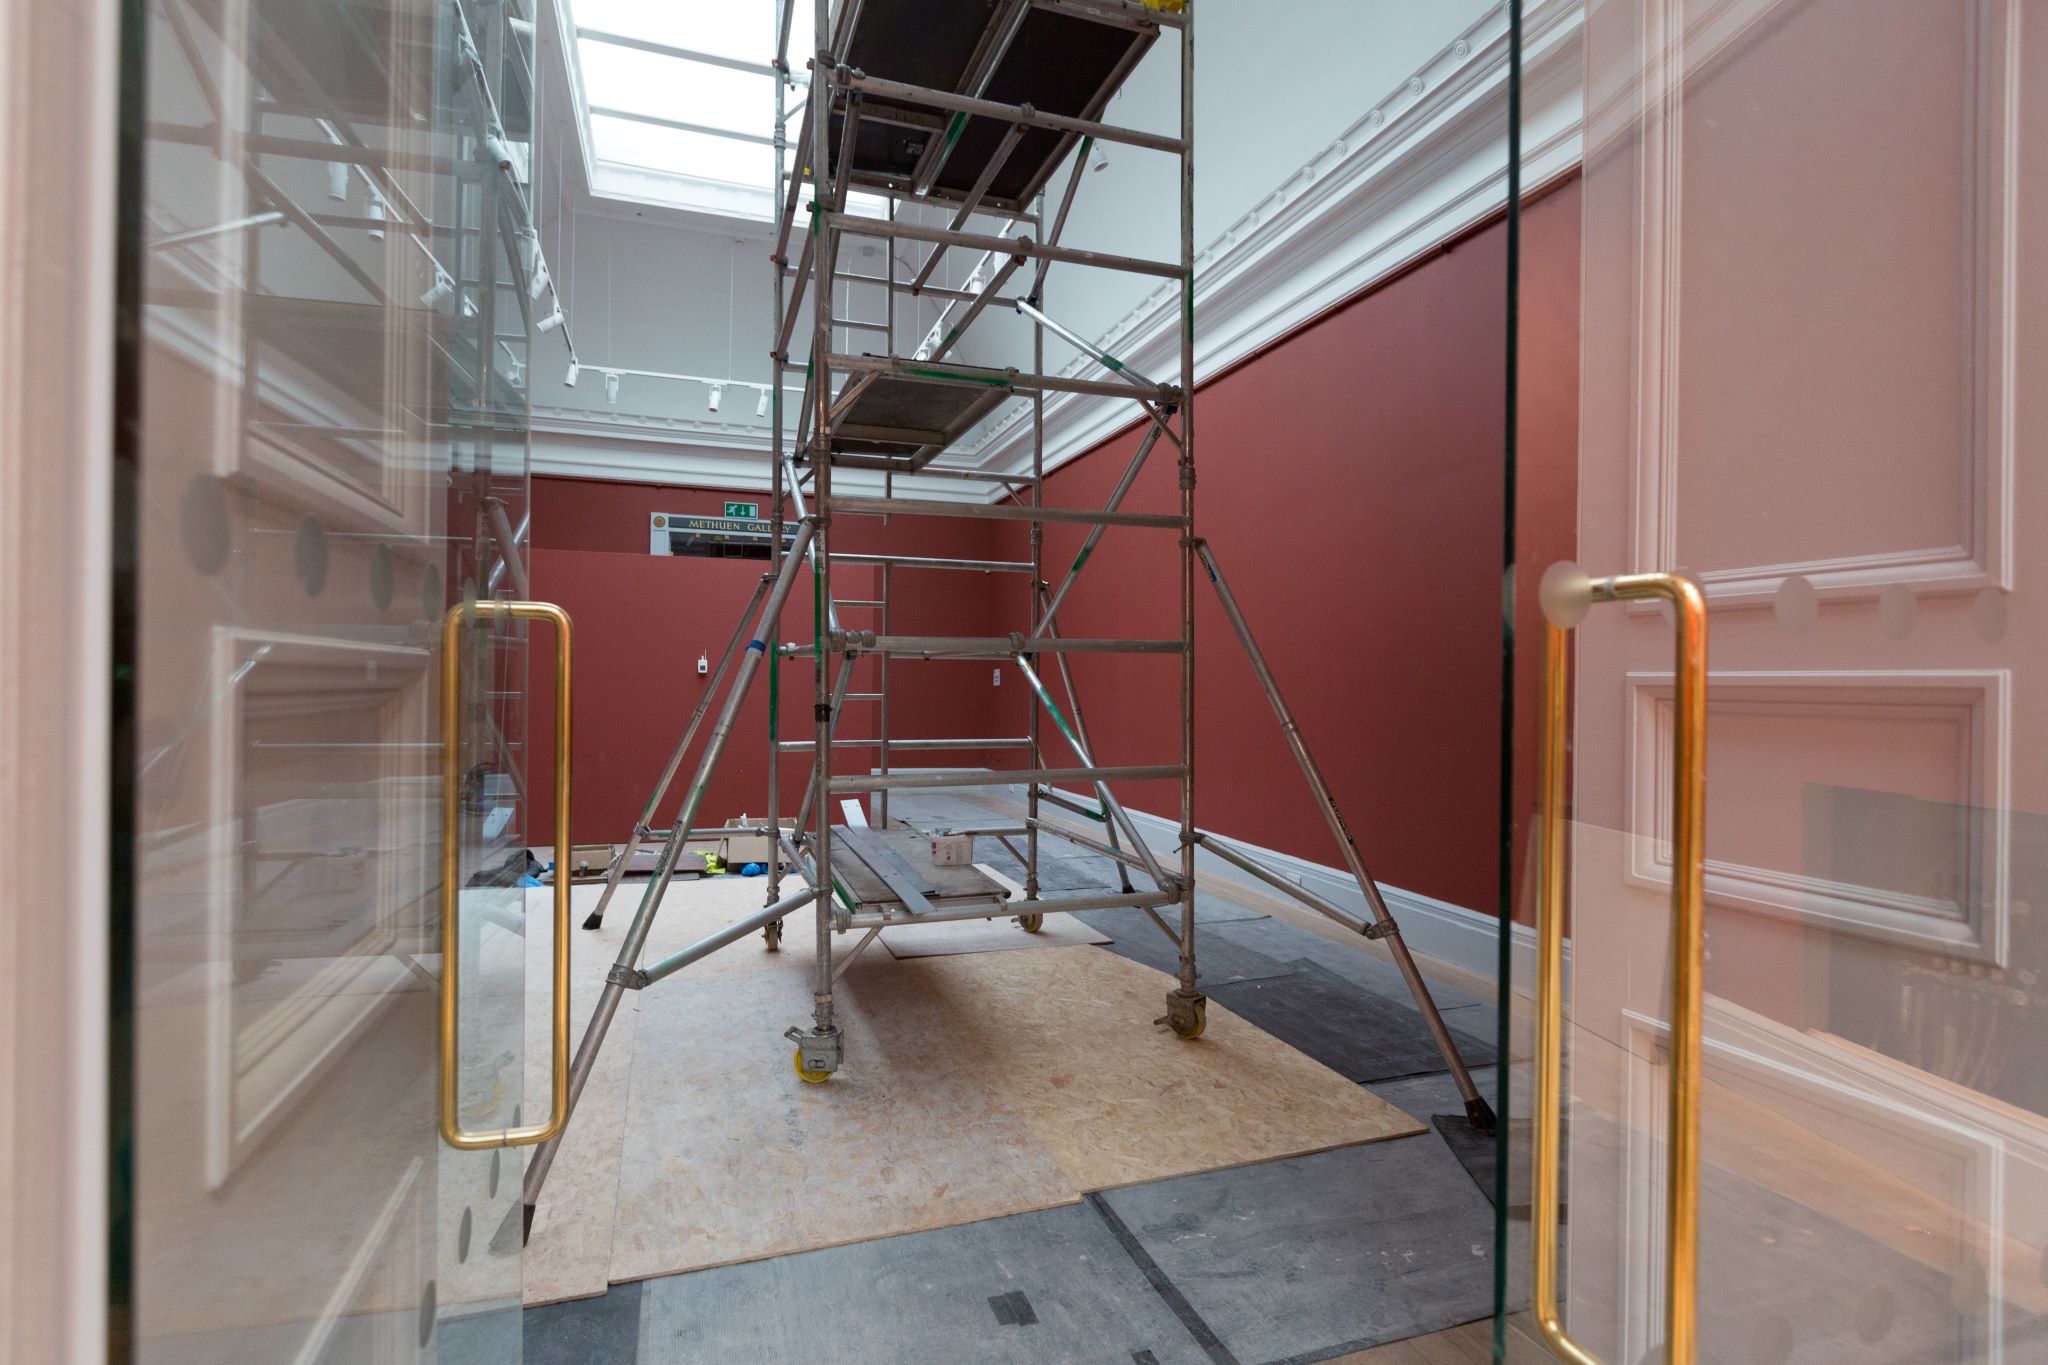 Glass double doors lead into a gallery space with red walls and scaffolding in the centre 